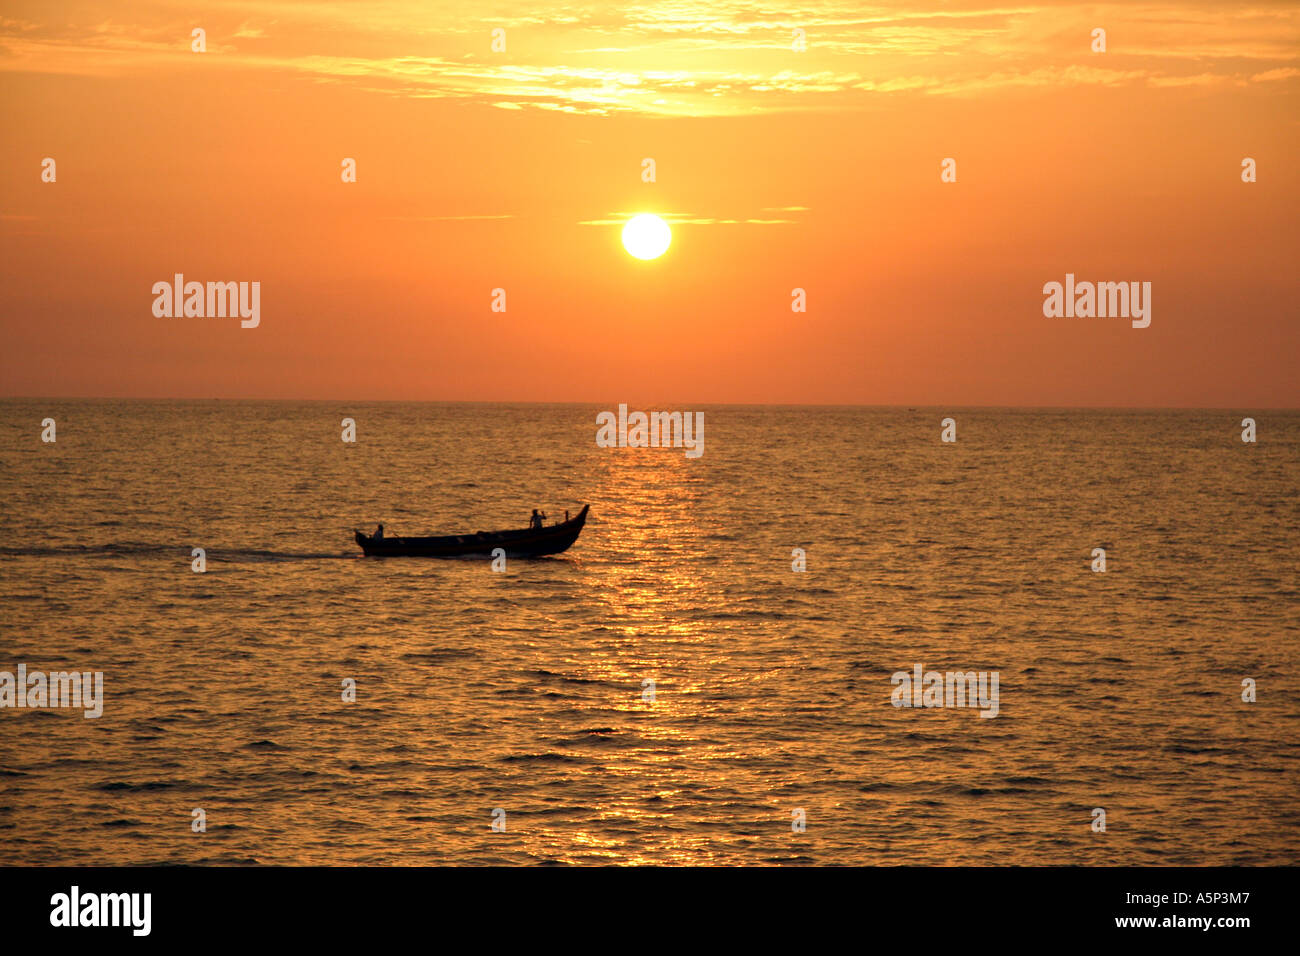 Beautiful sunset overlooking the arabian sea, Kovalam, Southern India, with traditional boat silhouetted in the distance Stock Photo